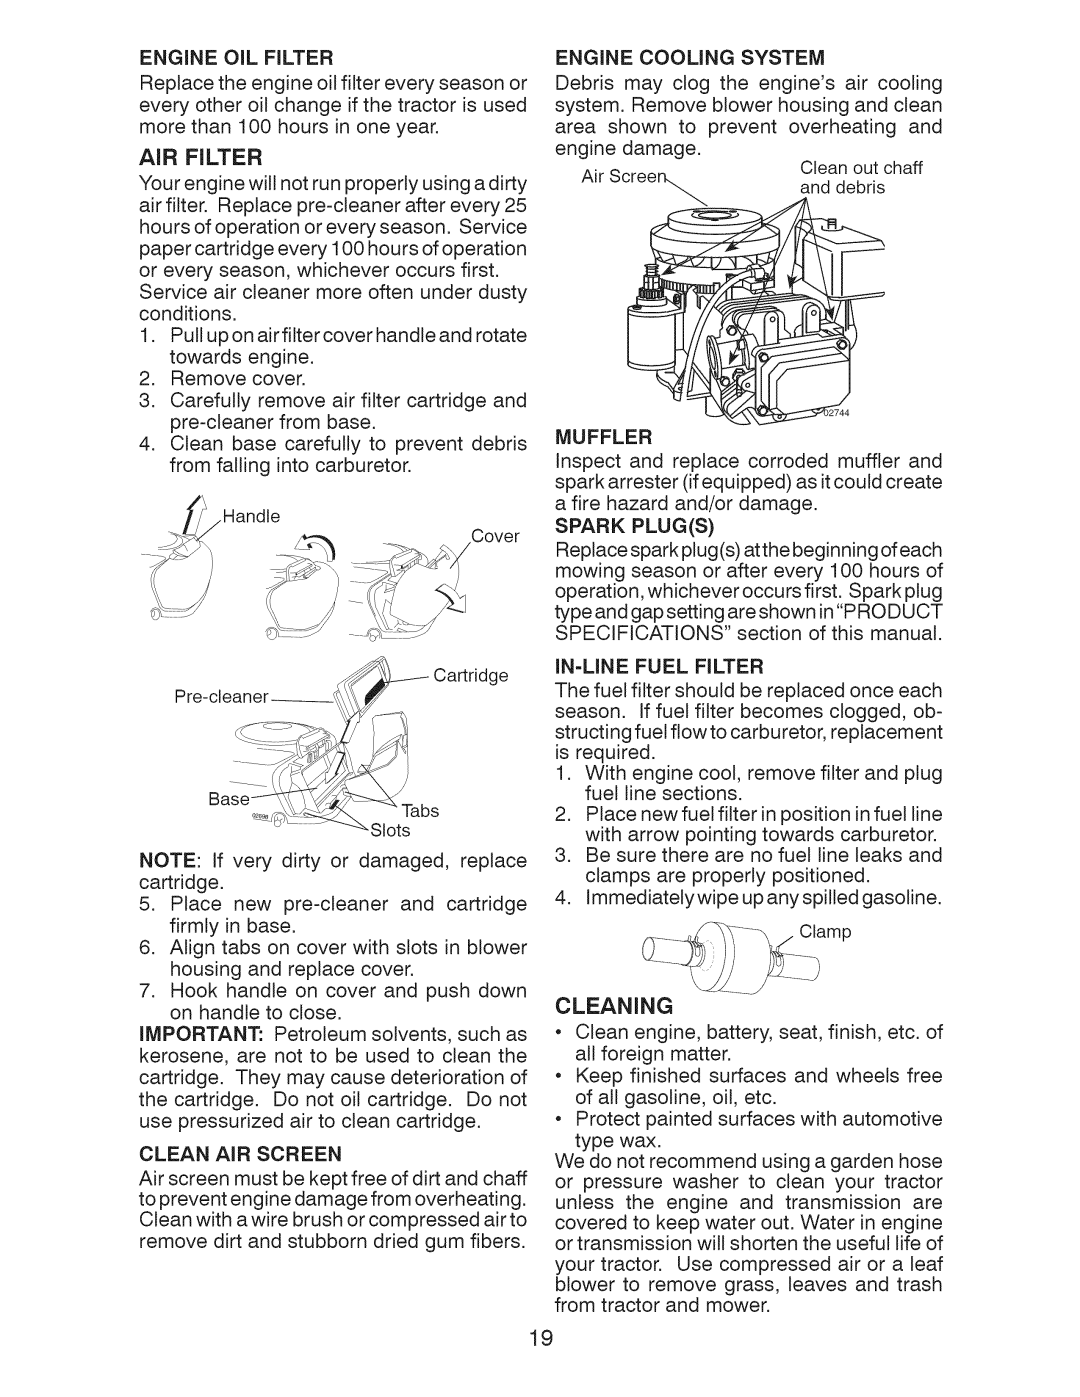 Craftsman 917.28922 owner manual Air Filter, Cleaning 